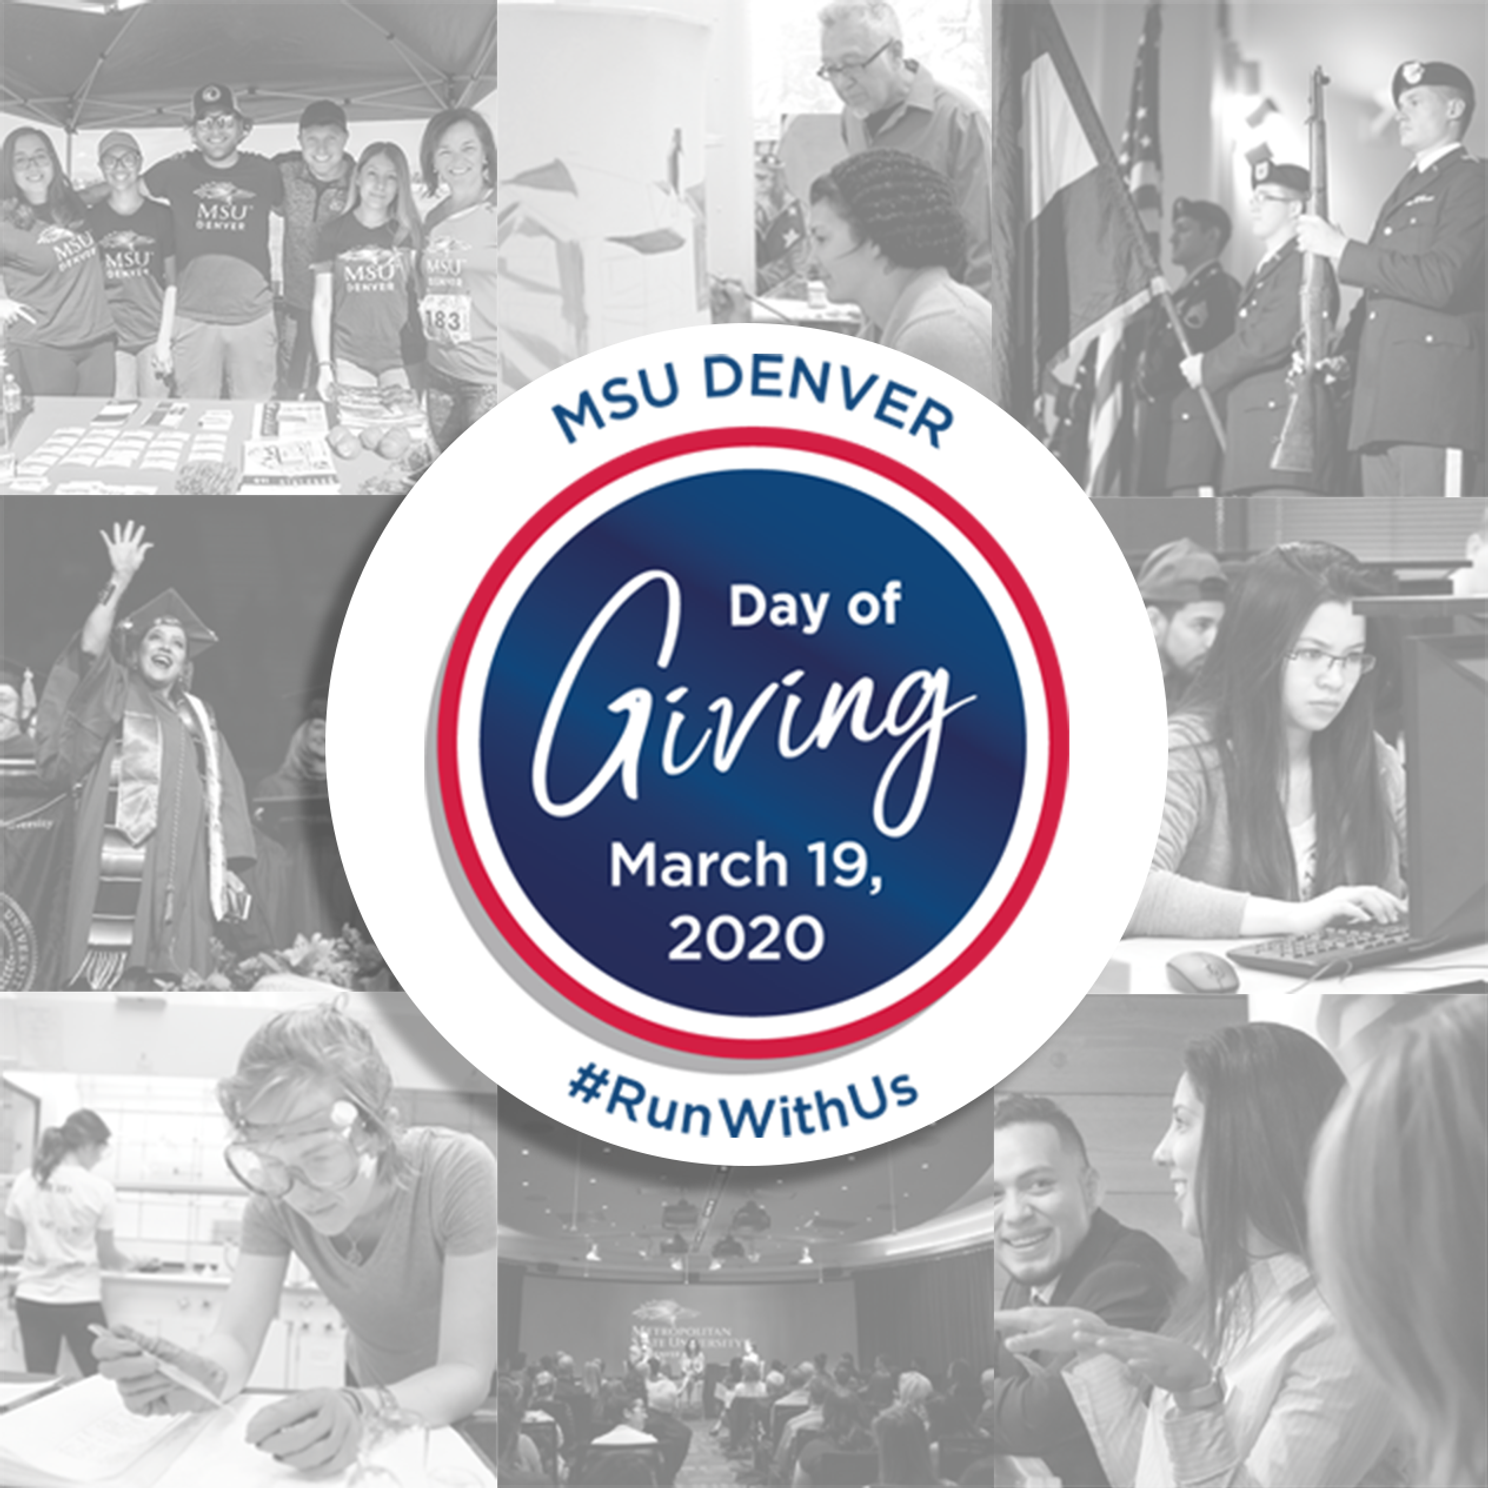 MSU Denver Day of Giving Web Banner with logo